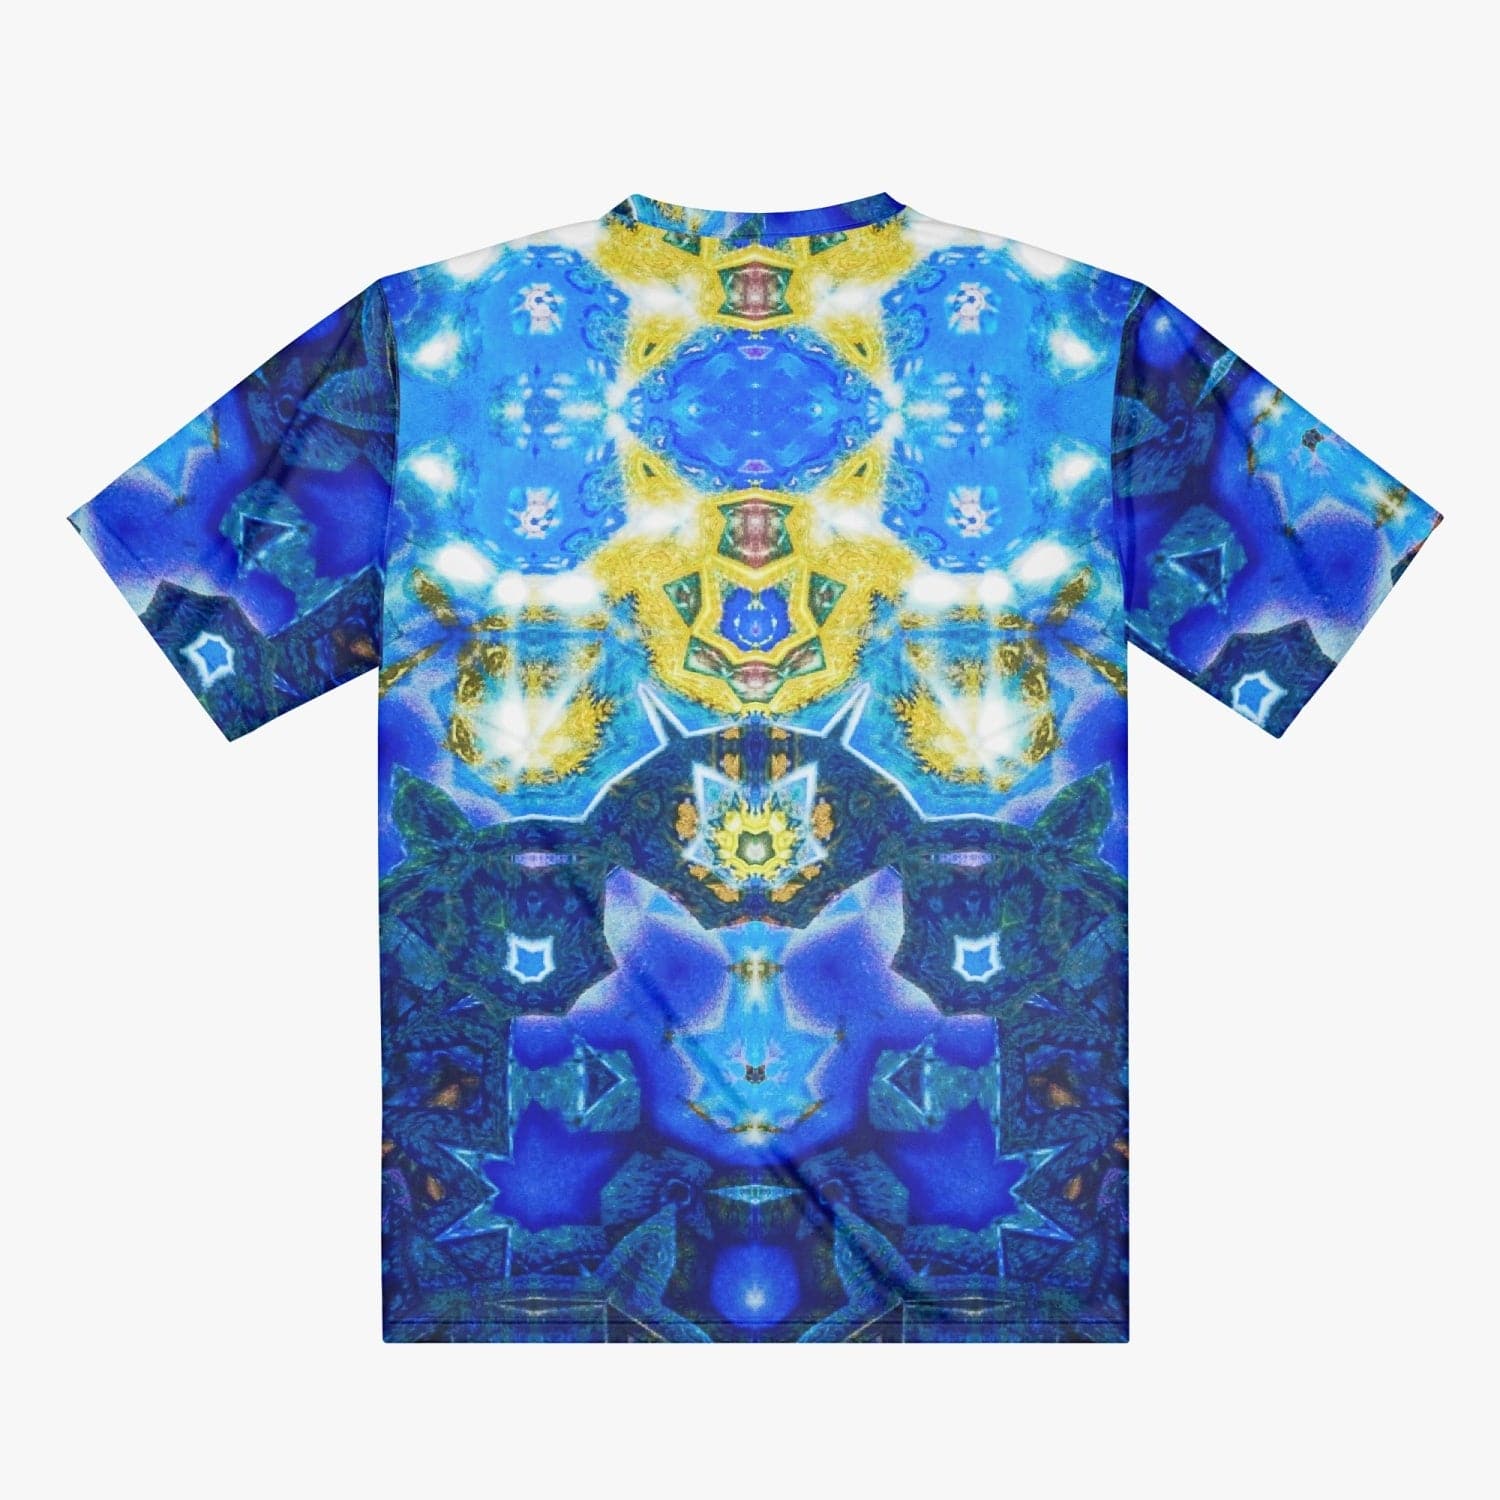 Enlightenment Blue with Yellow Pattern Handmade T-shirt for Men by Sensus Studio Design